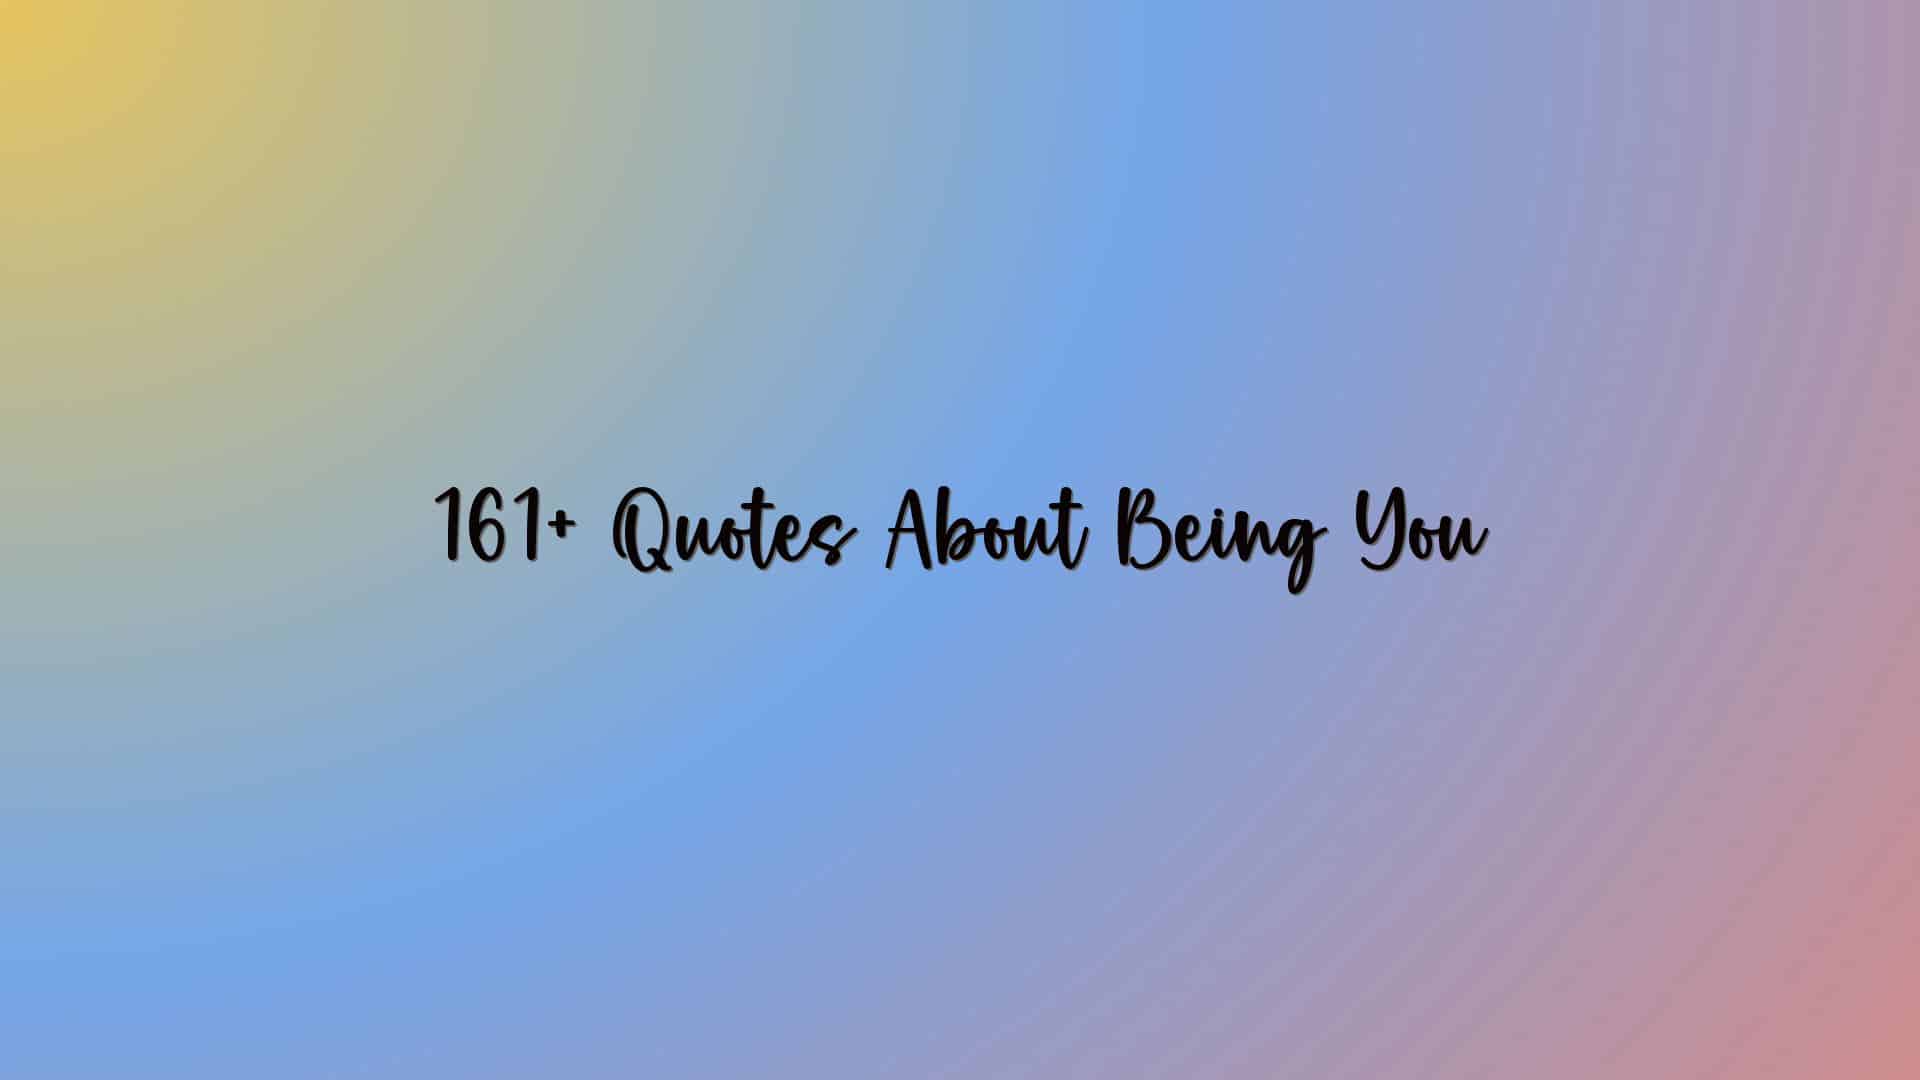 161+ Quotes About Being You